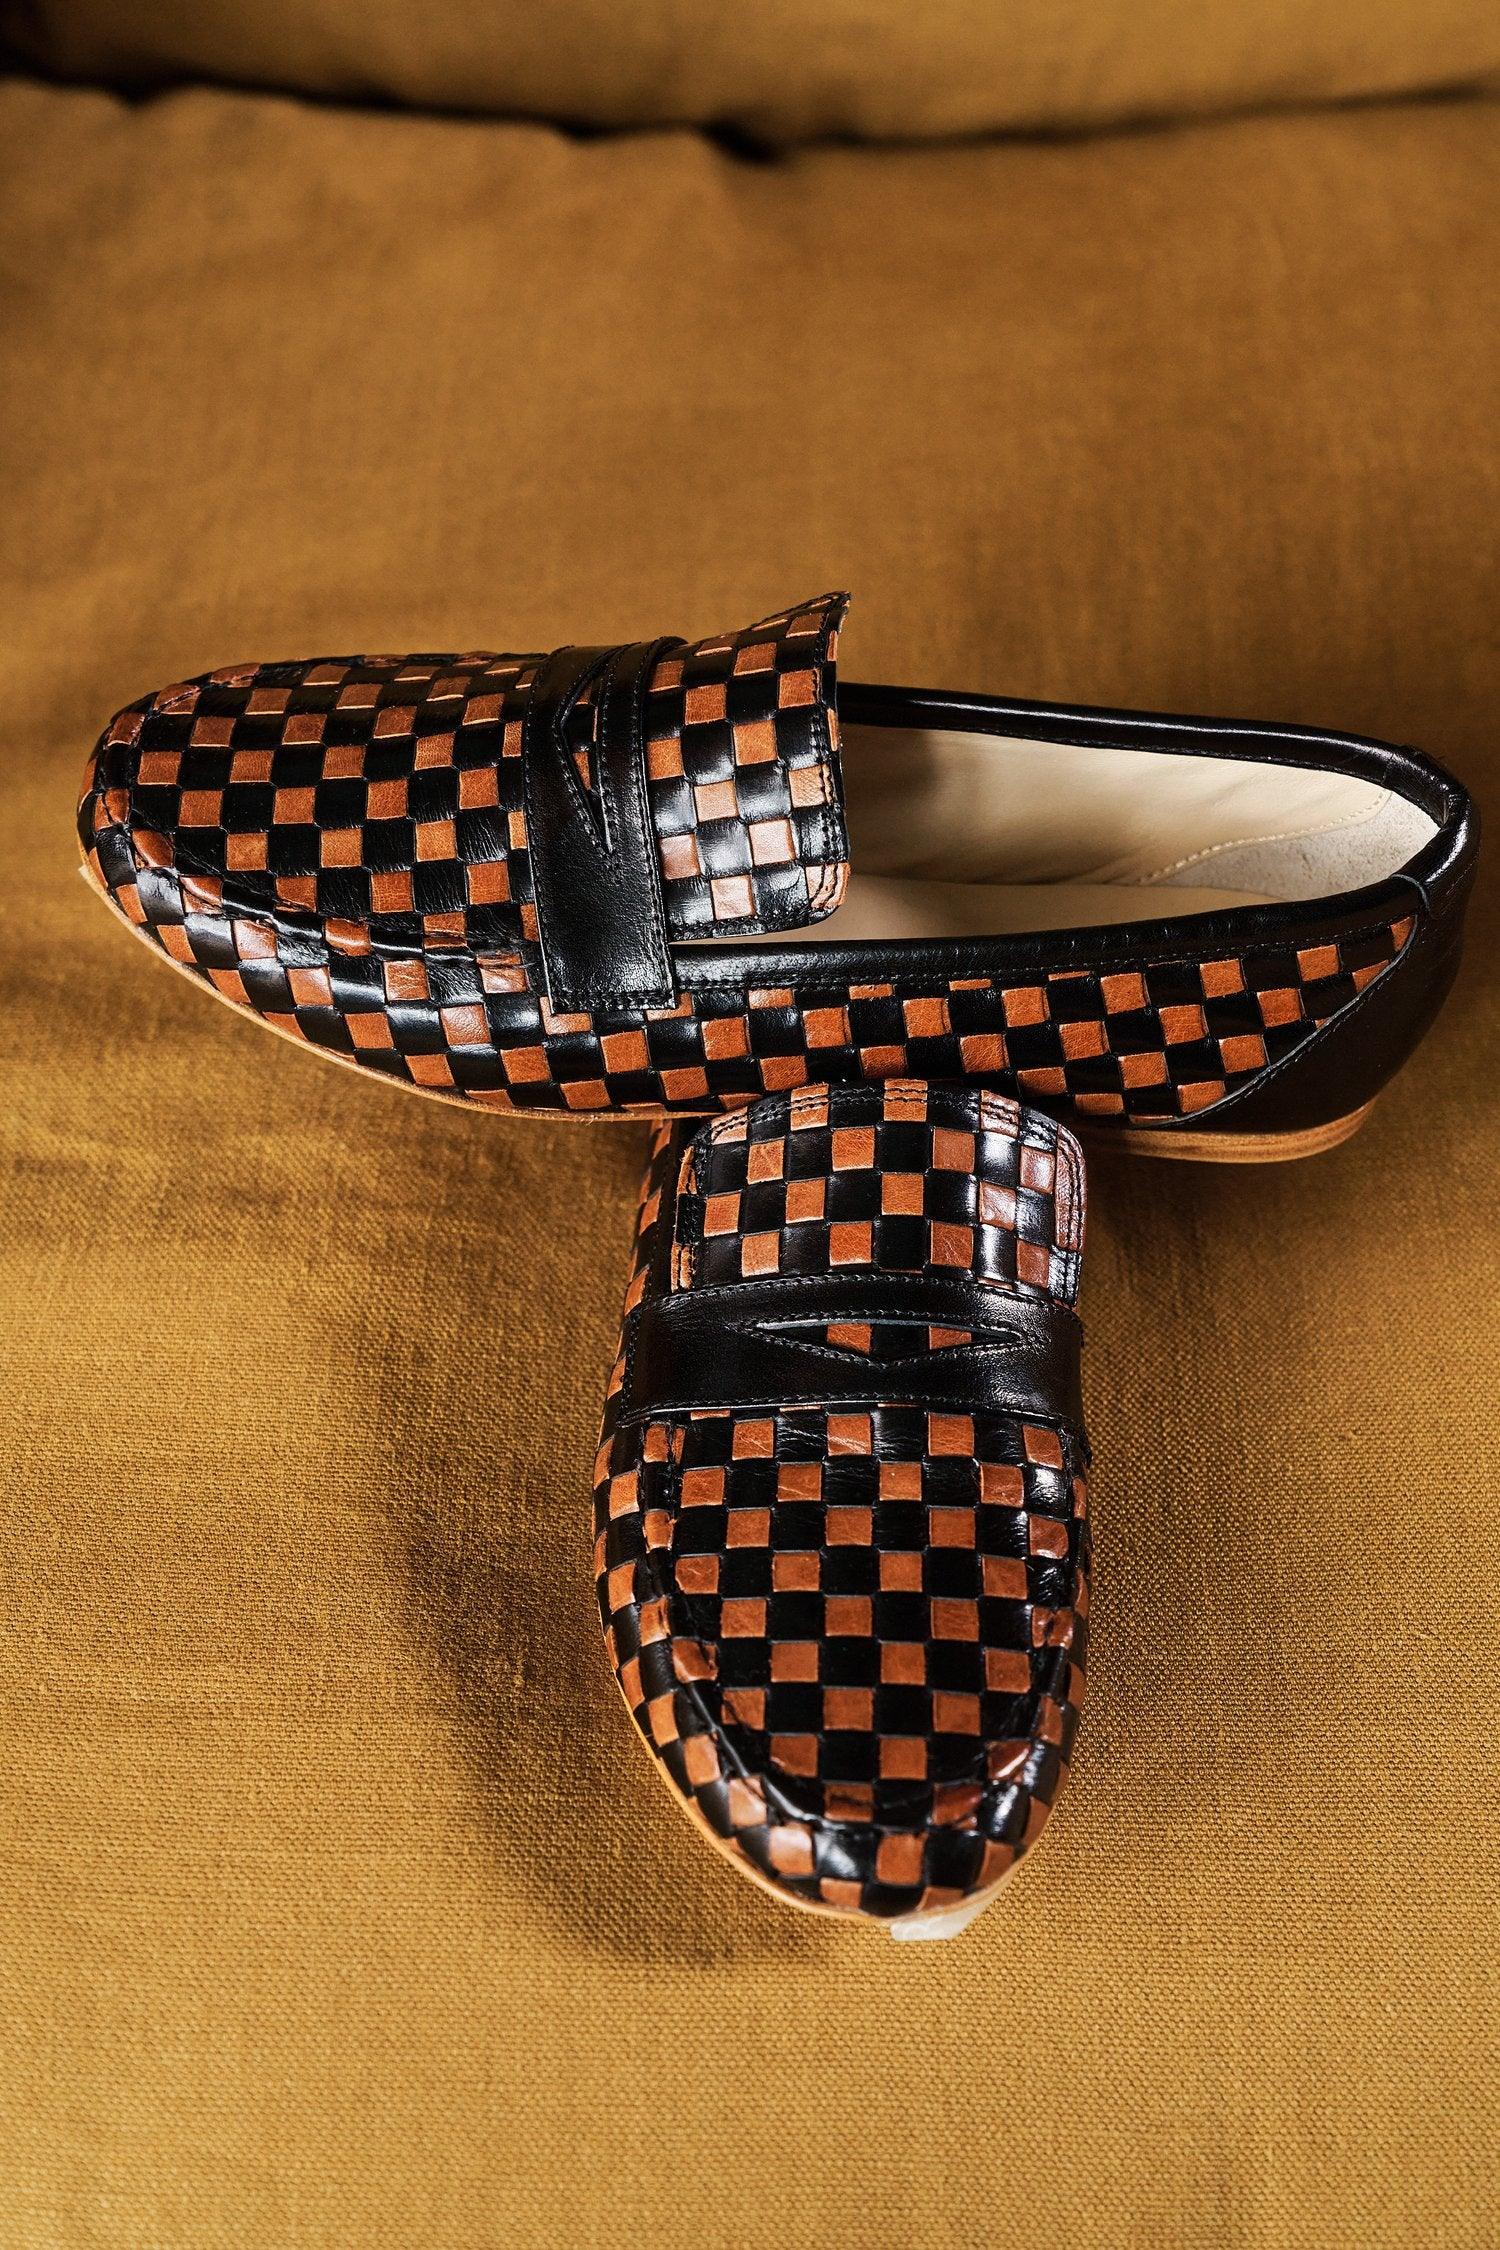 Black and Brown Woven Loafer Flat View on Top of Green Couch